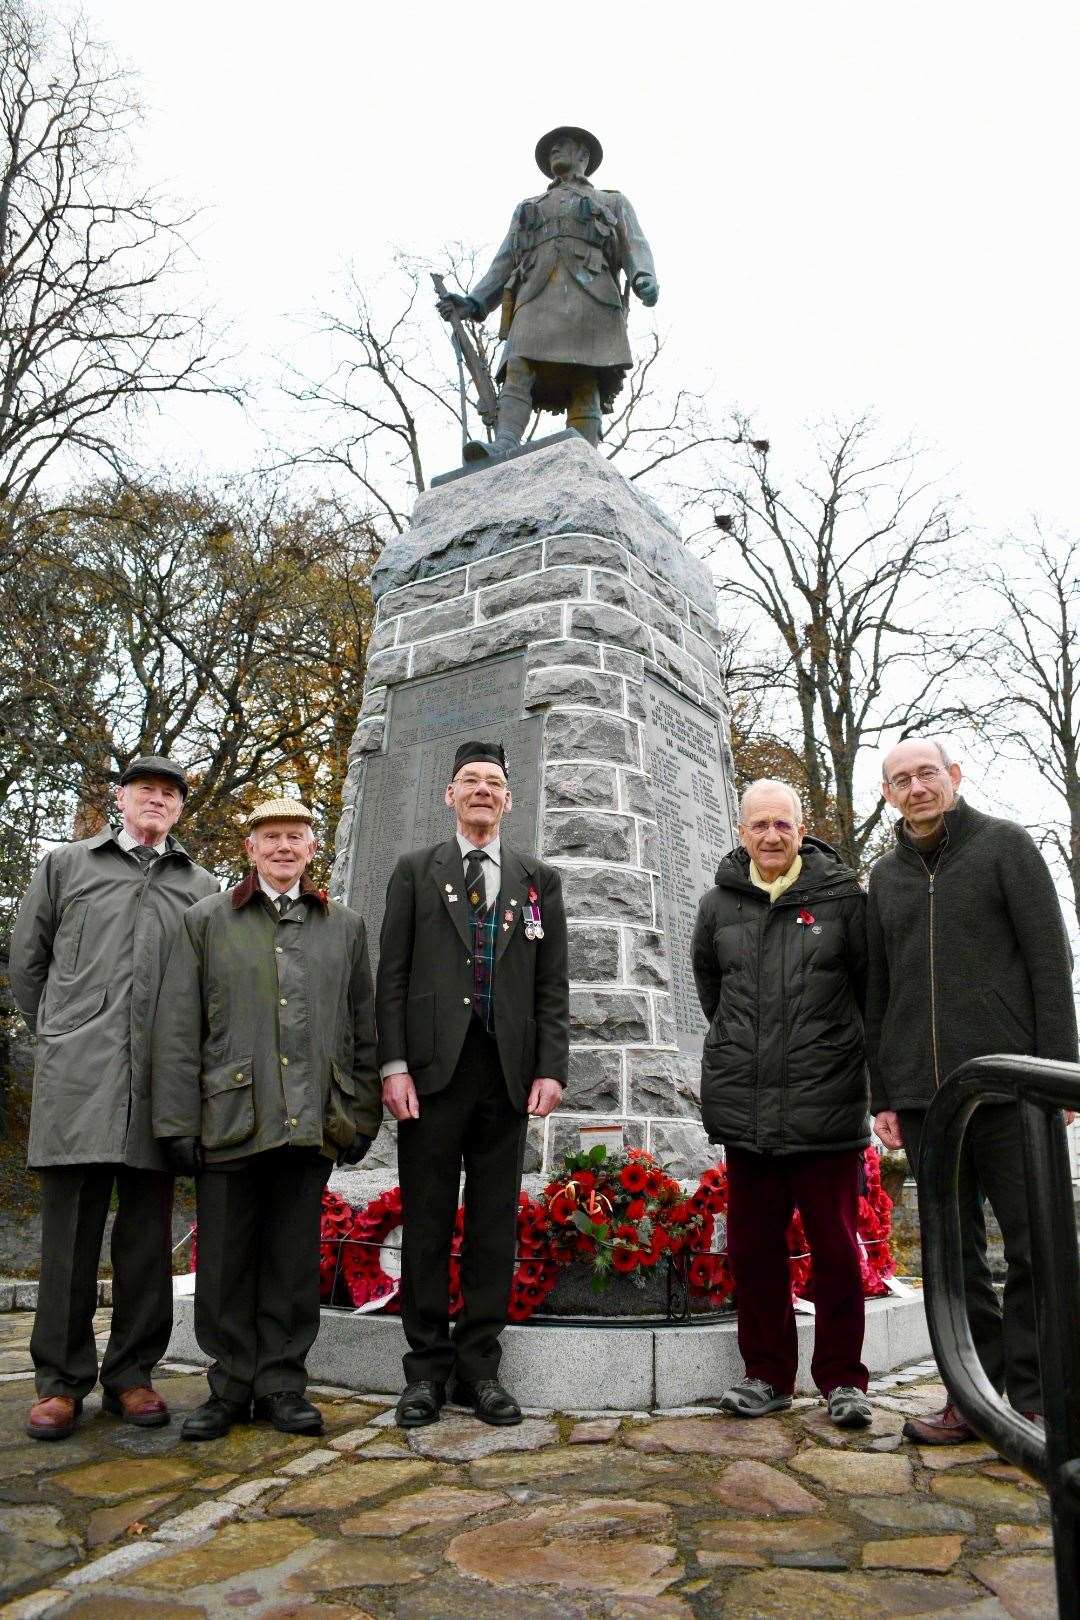 The wreath was laid at the War Memorial in Forres.